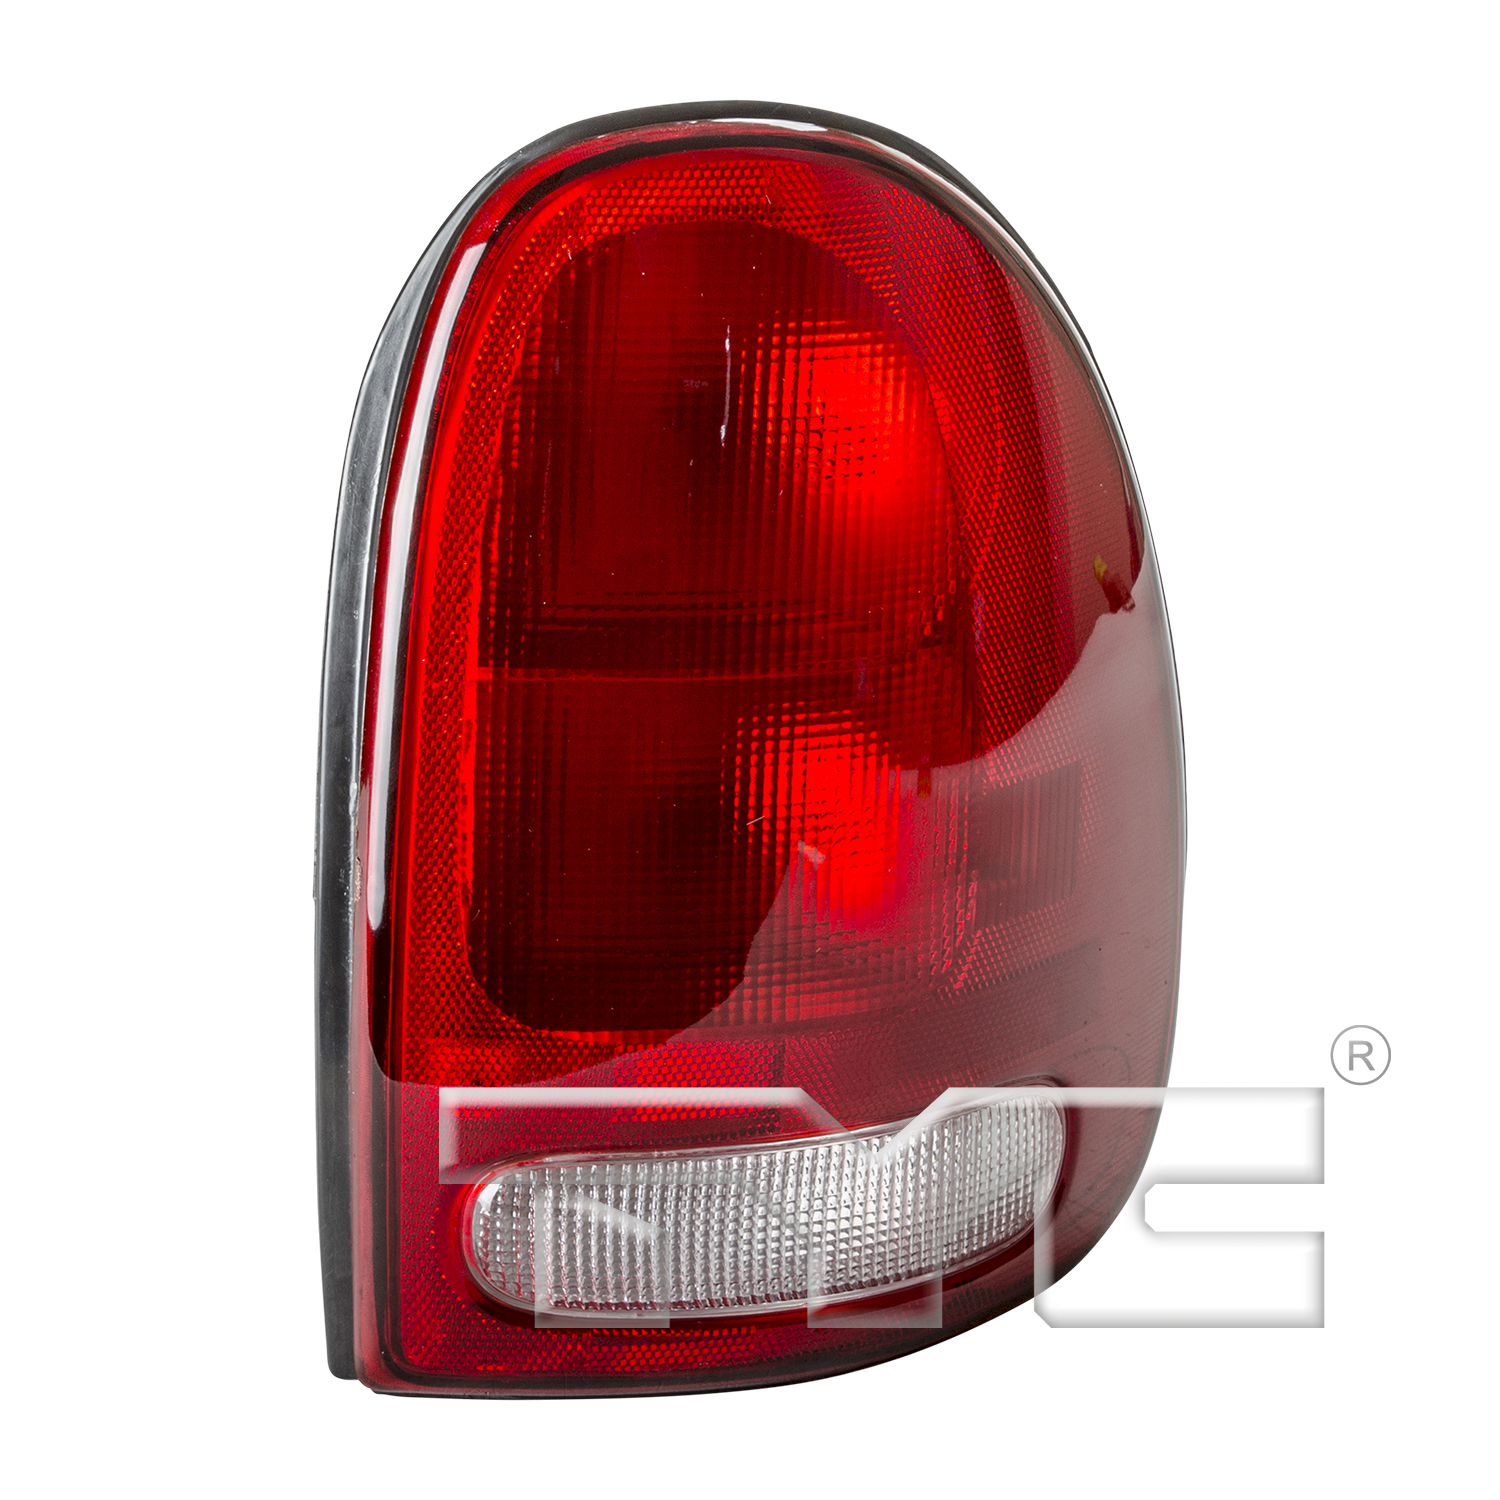 Aftermarket TAILLIGHTS for DODGE - DURANGO, DURANGO,98-03,RT Taillamp assy